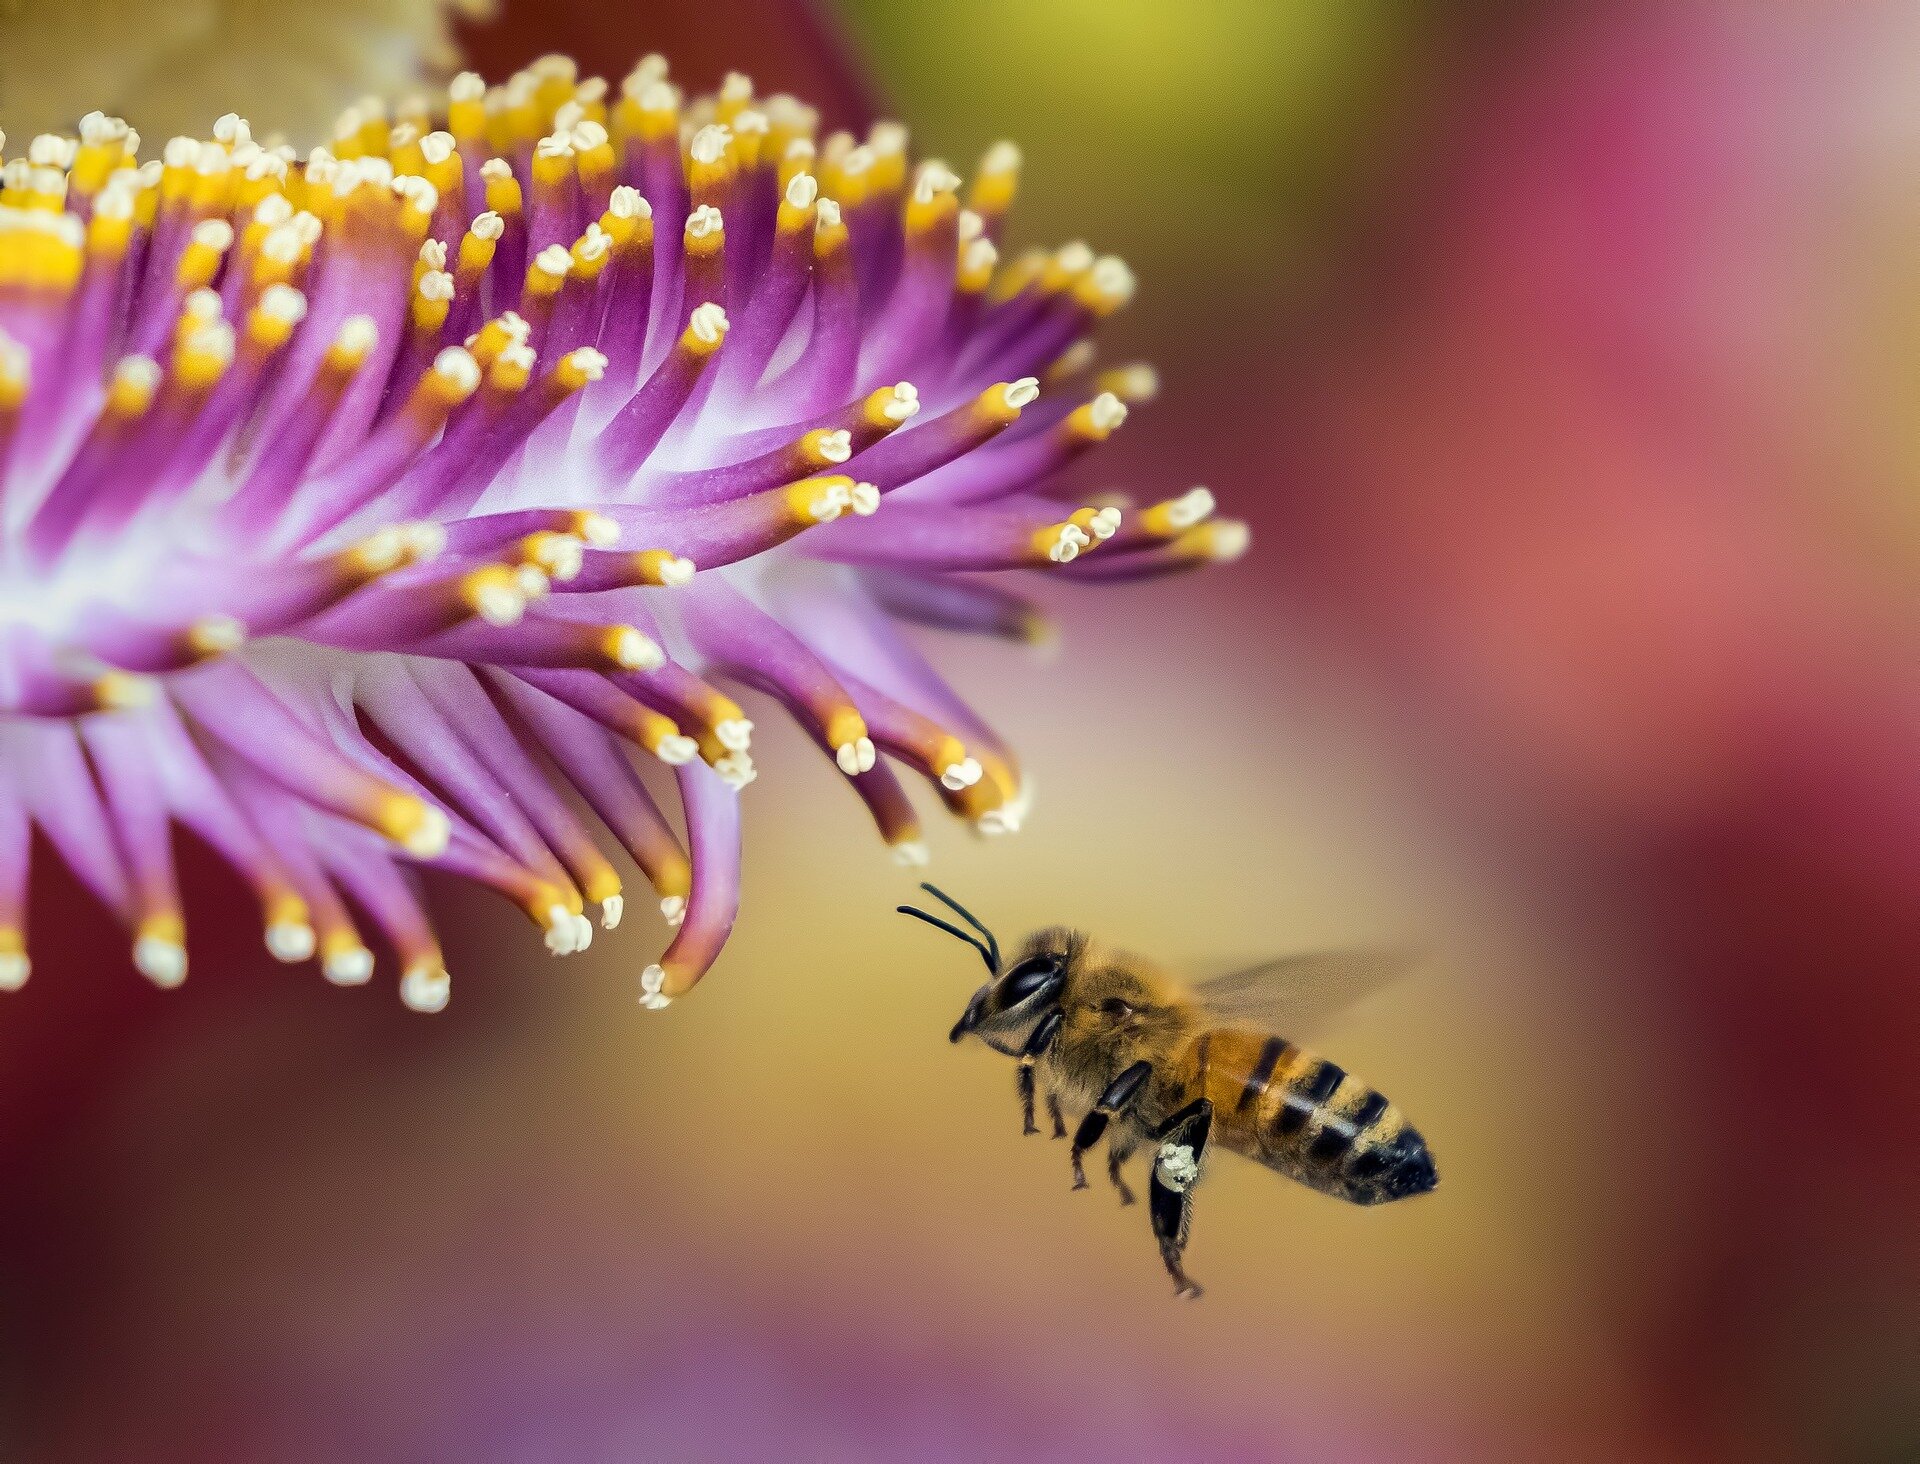 Honeybees at risk, along with the crops they pollinate: Scientists